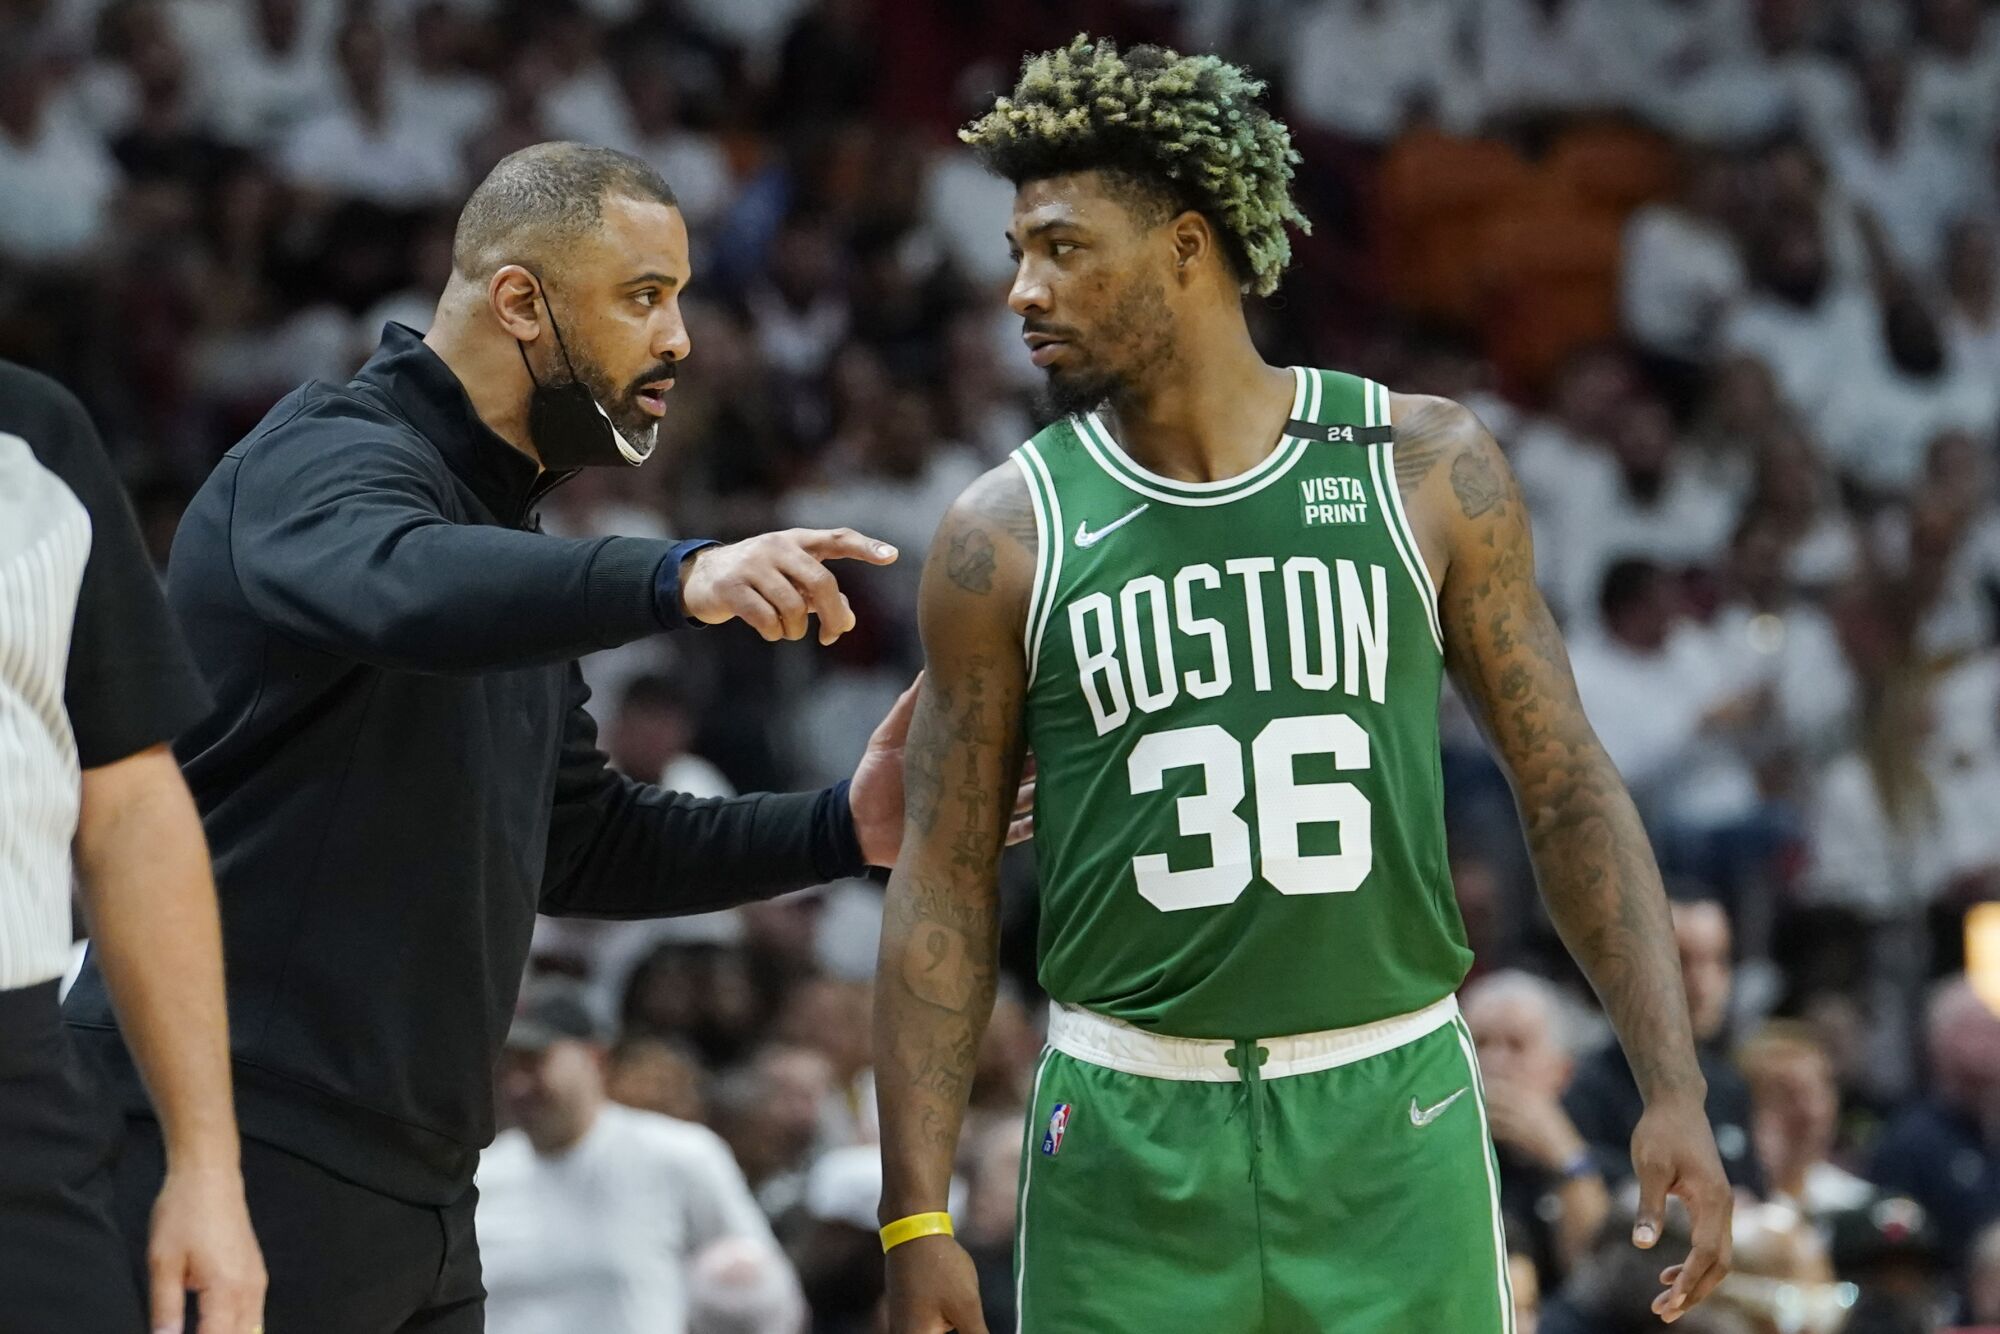 Celtics coach Ime Udoka talks to guard Marcus Smart along the sideline during a break in play.